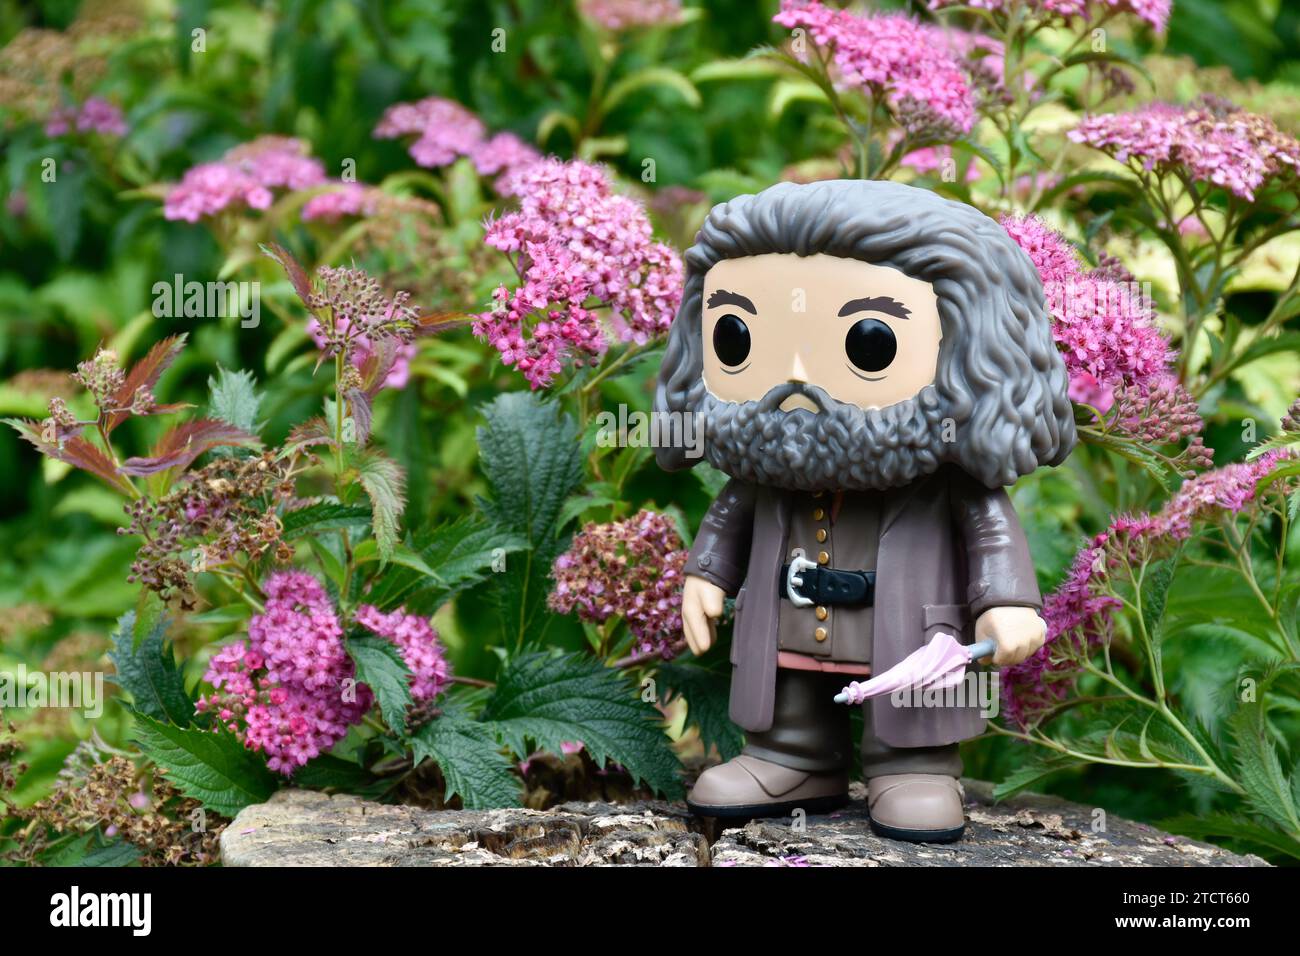 https://c8.alamy.com/comp/2TCT660/funko-pop-action-figure-of-gamekeeper-half-giant-hagrid-with-umbrella-from-fantasy-movie-harry-potter-pink-flowers-forest-glade-tree-stump-2TCT660.jpg